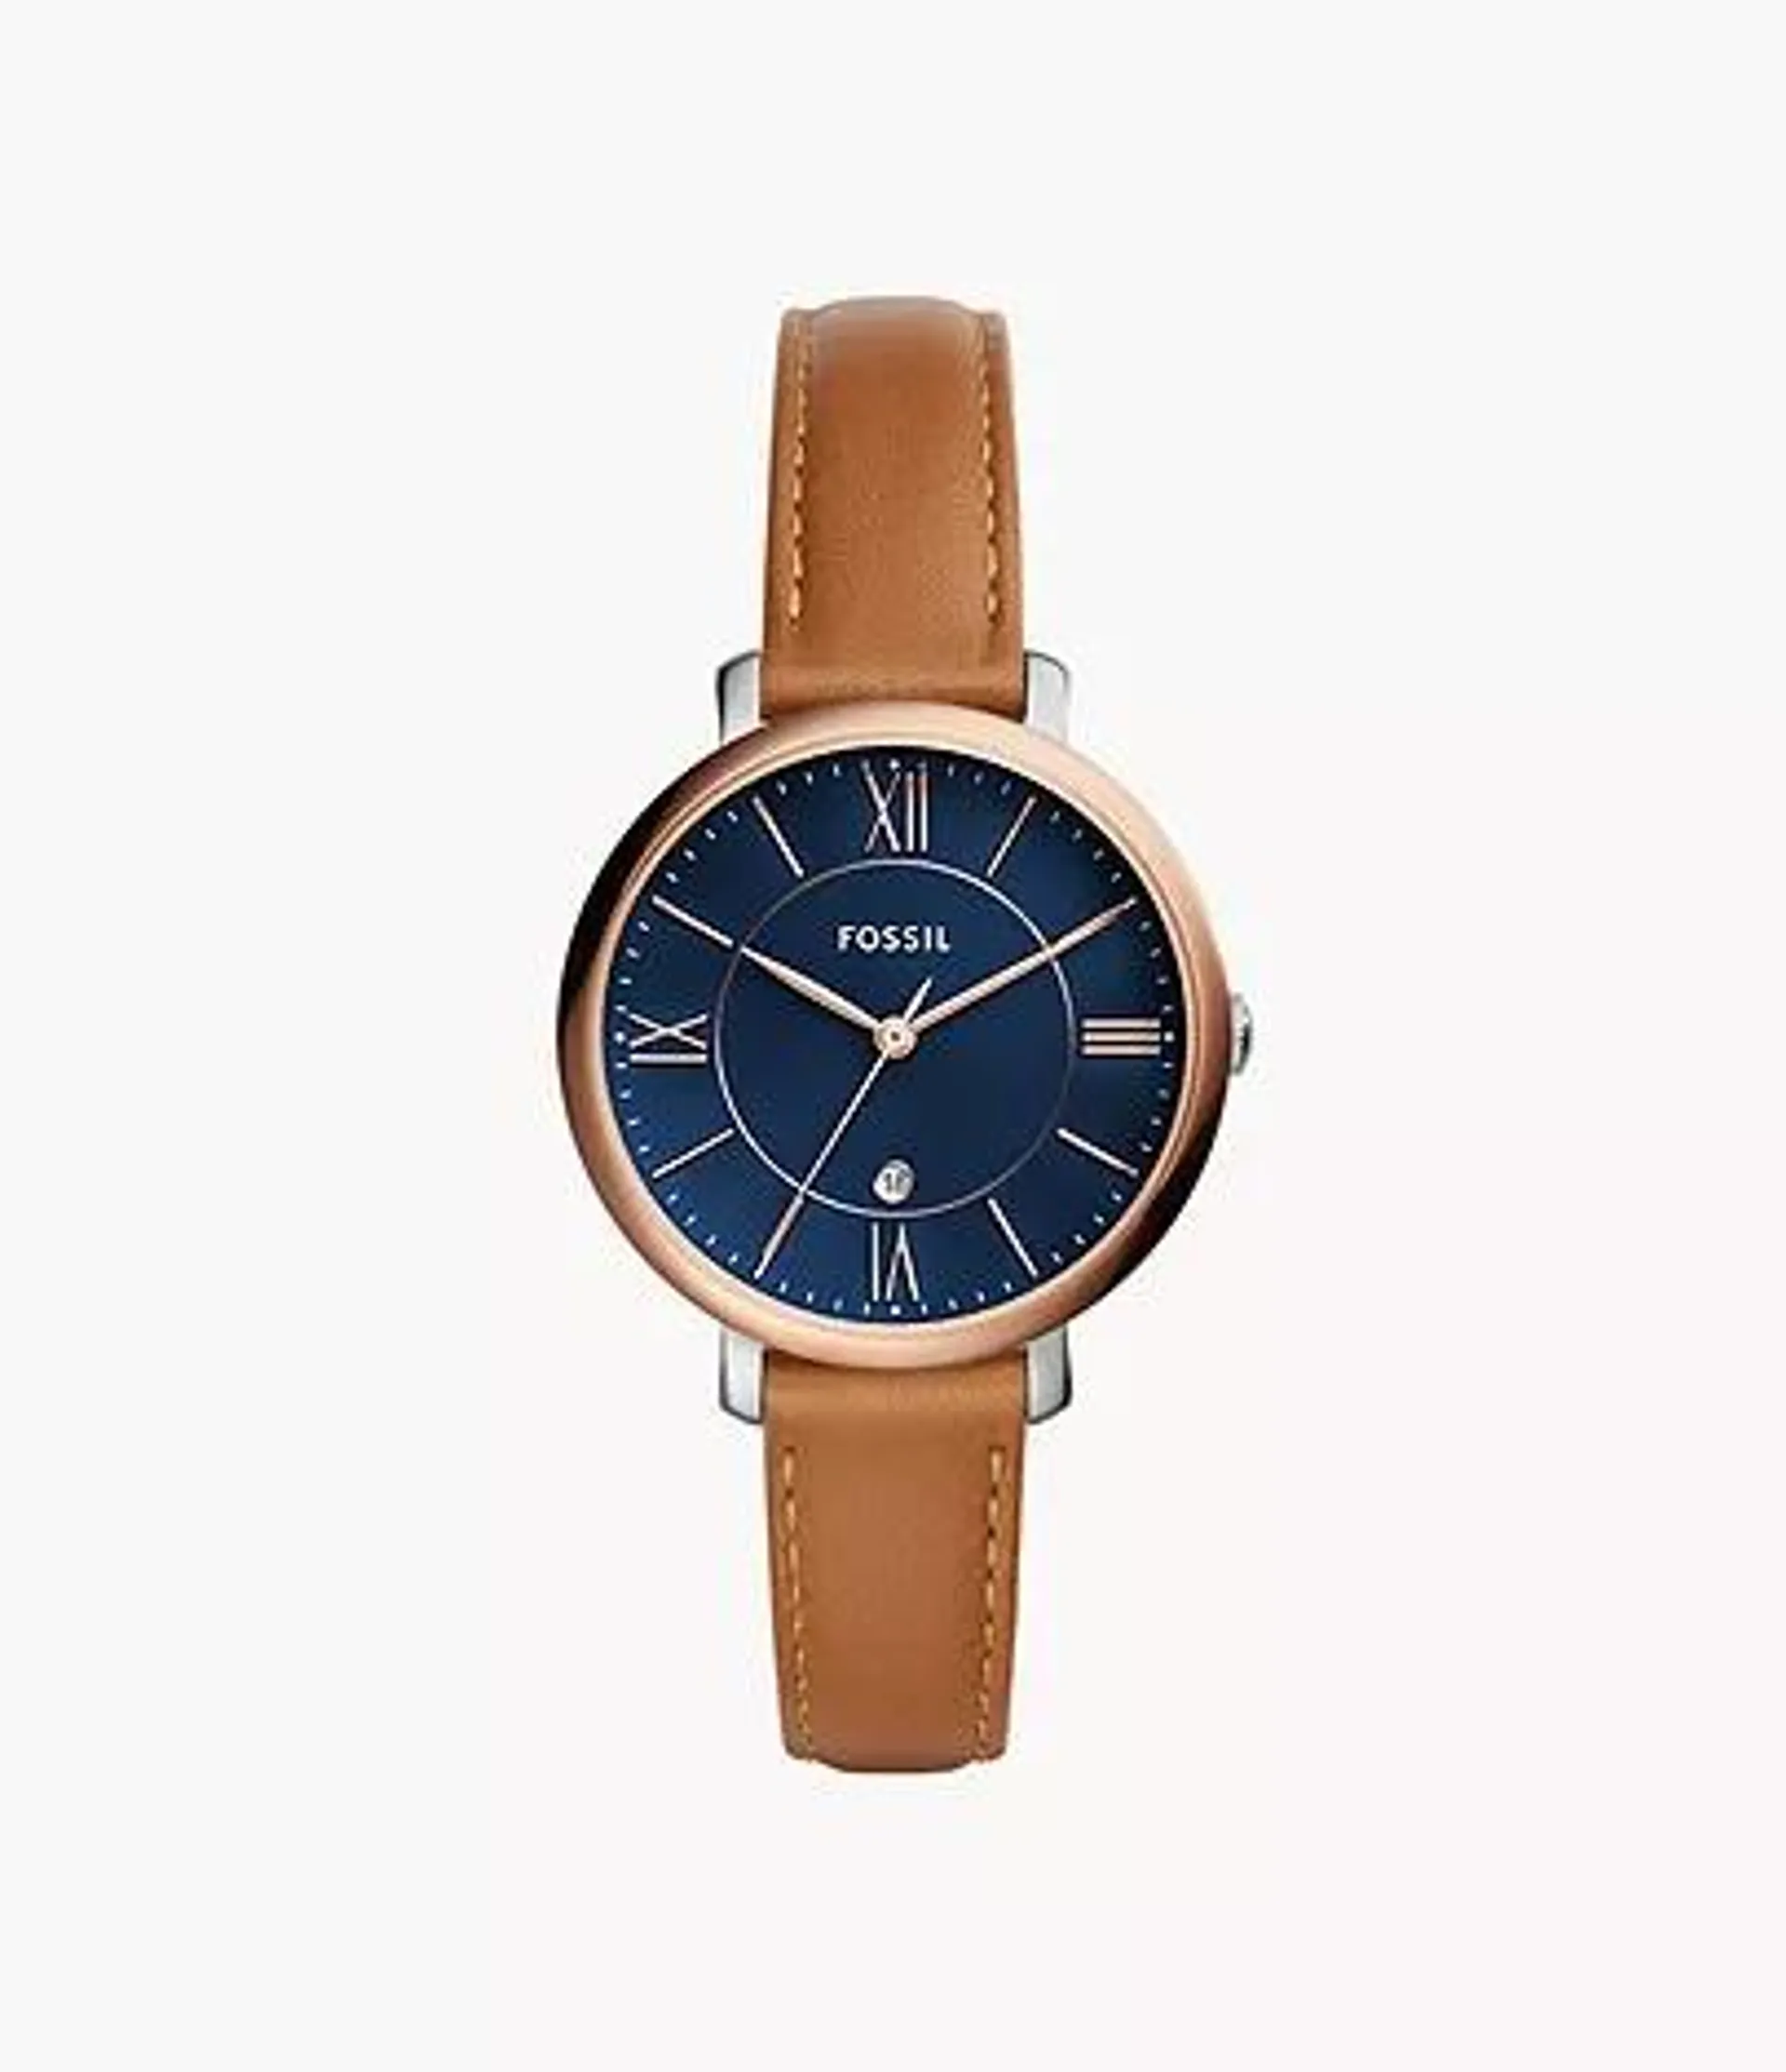 Jacqueline Three-Hand Date Luggage Leather Watch